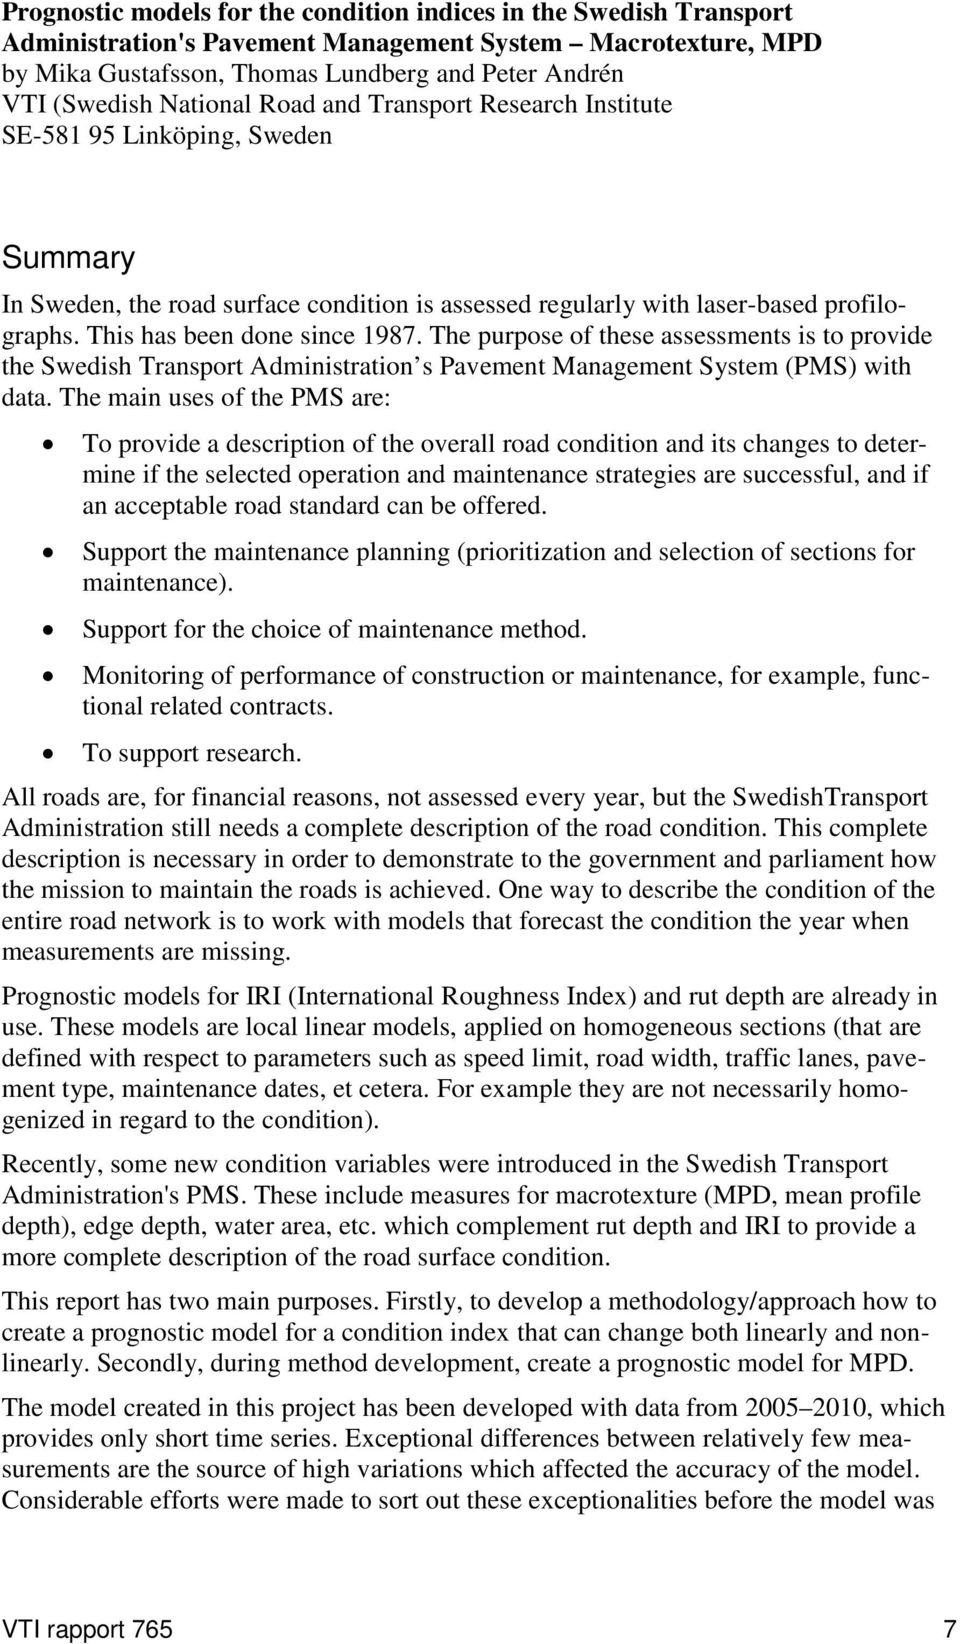 This has been done since 1987. The purpose of these assessments is to provide the Swedish Transport Administration s Pavement Management System (PMS) with data.